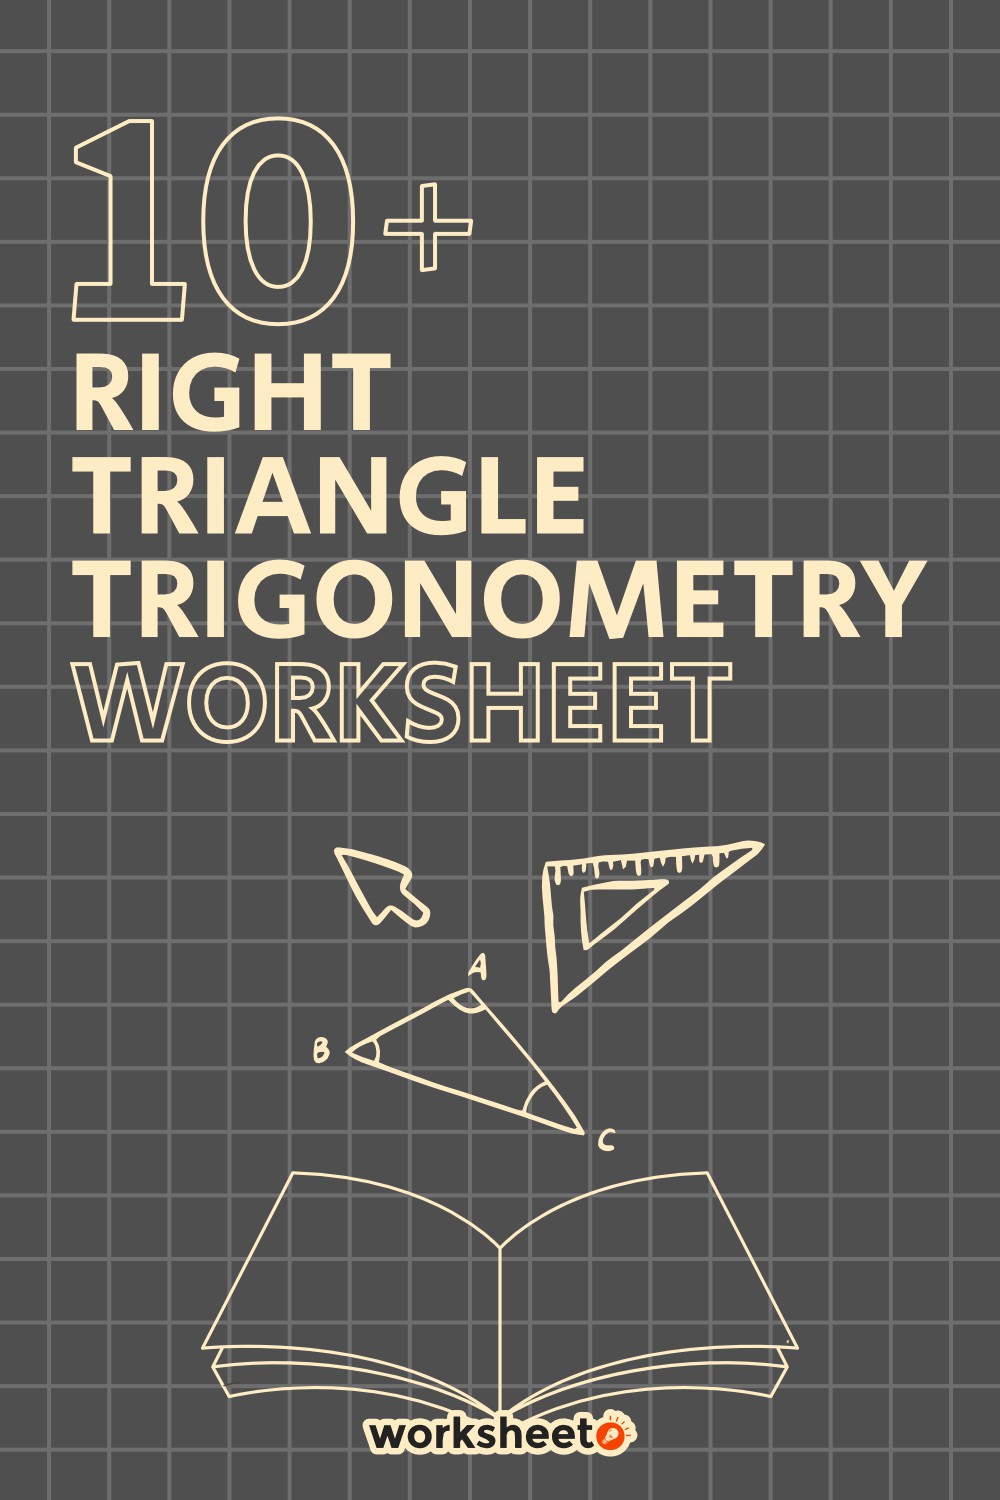 12 Images of Right Triangle Trigonometry Worksheet